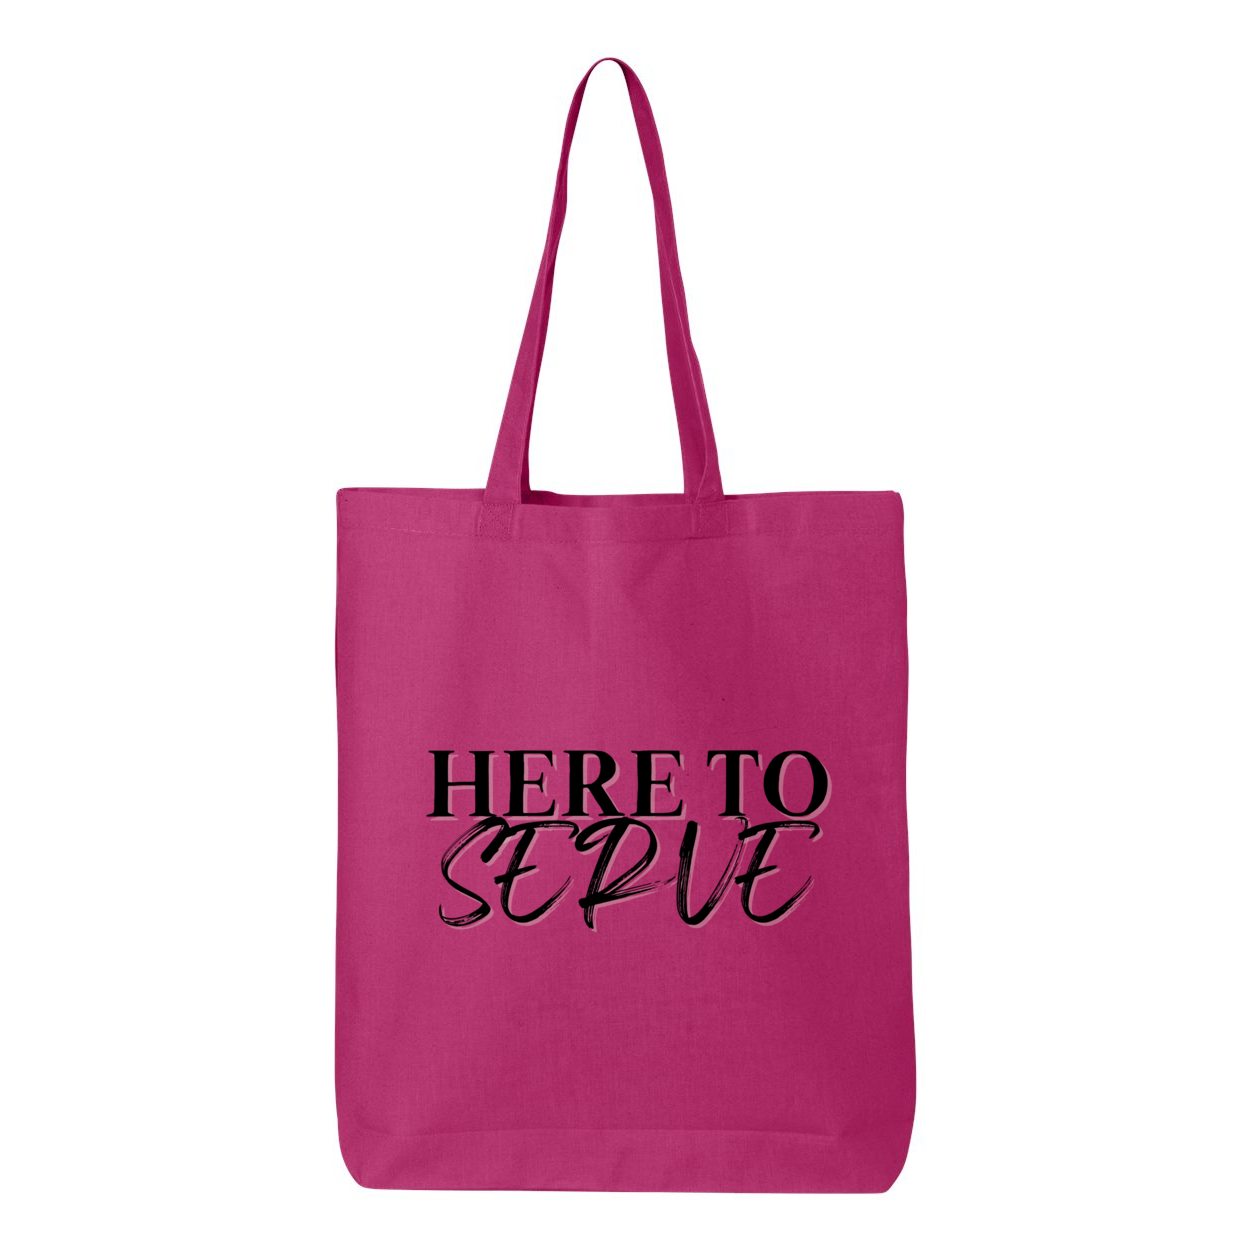 Here to Serve Tote